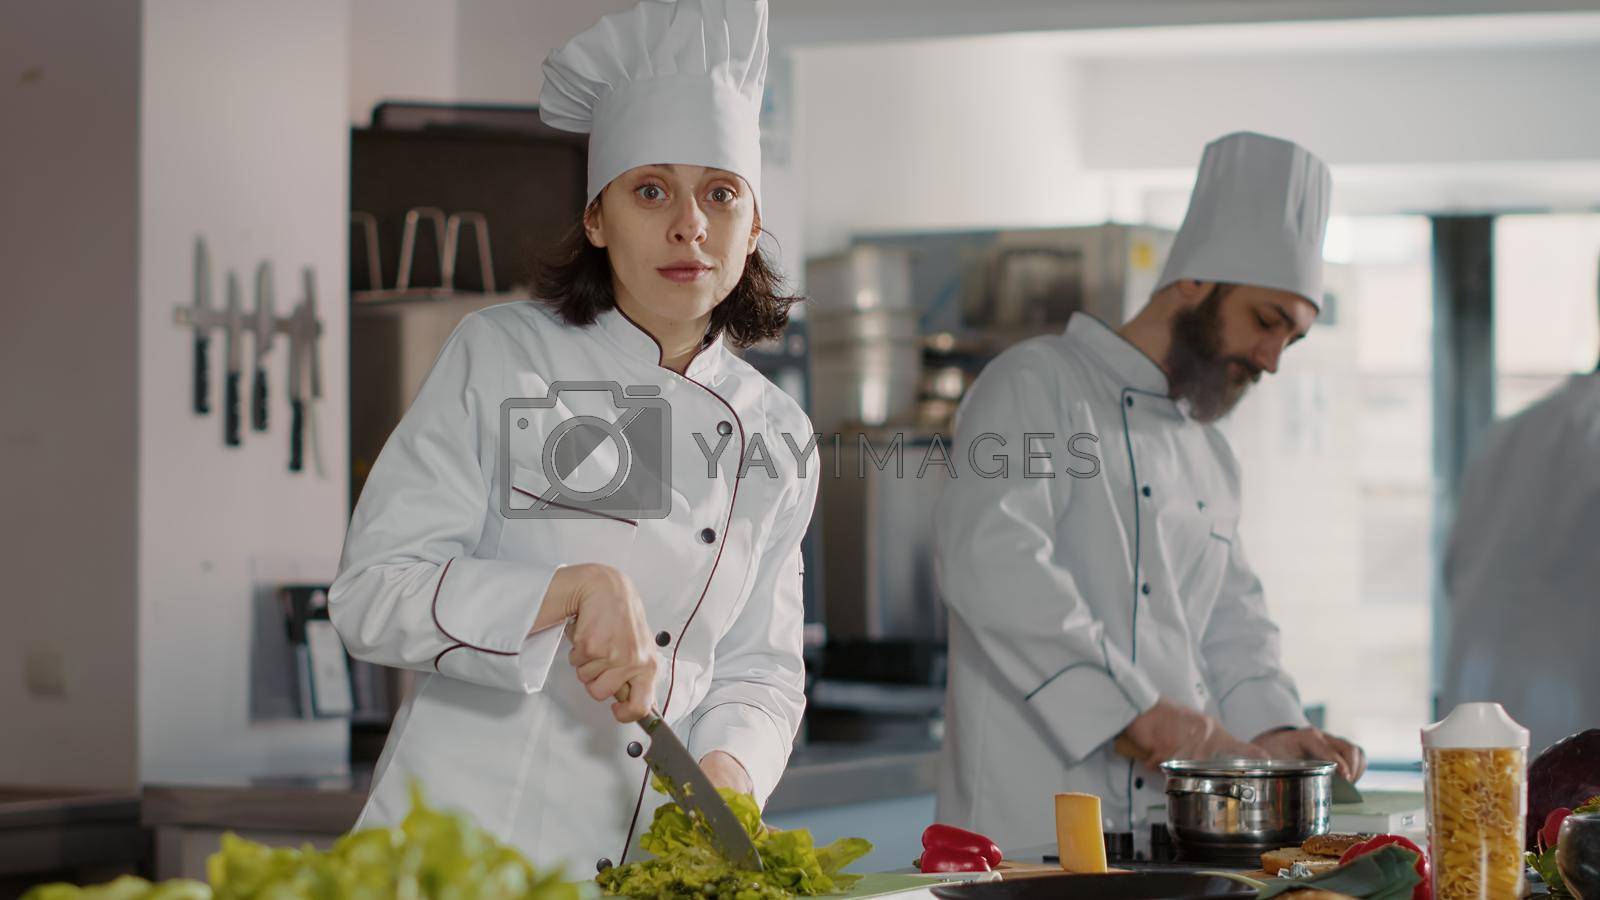 Portrait of female chef preparing celery ingredients for food dish, looking at camera. Woman in white uniform cooking professional meal with organic natural greens and salad for culinary recipe.